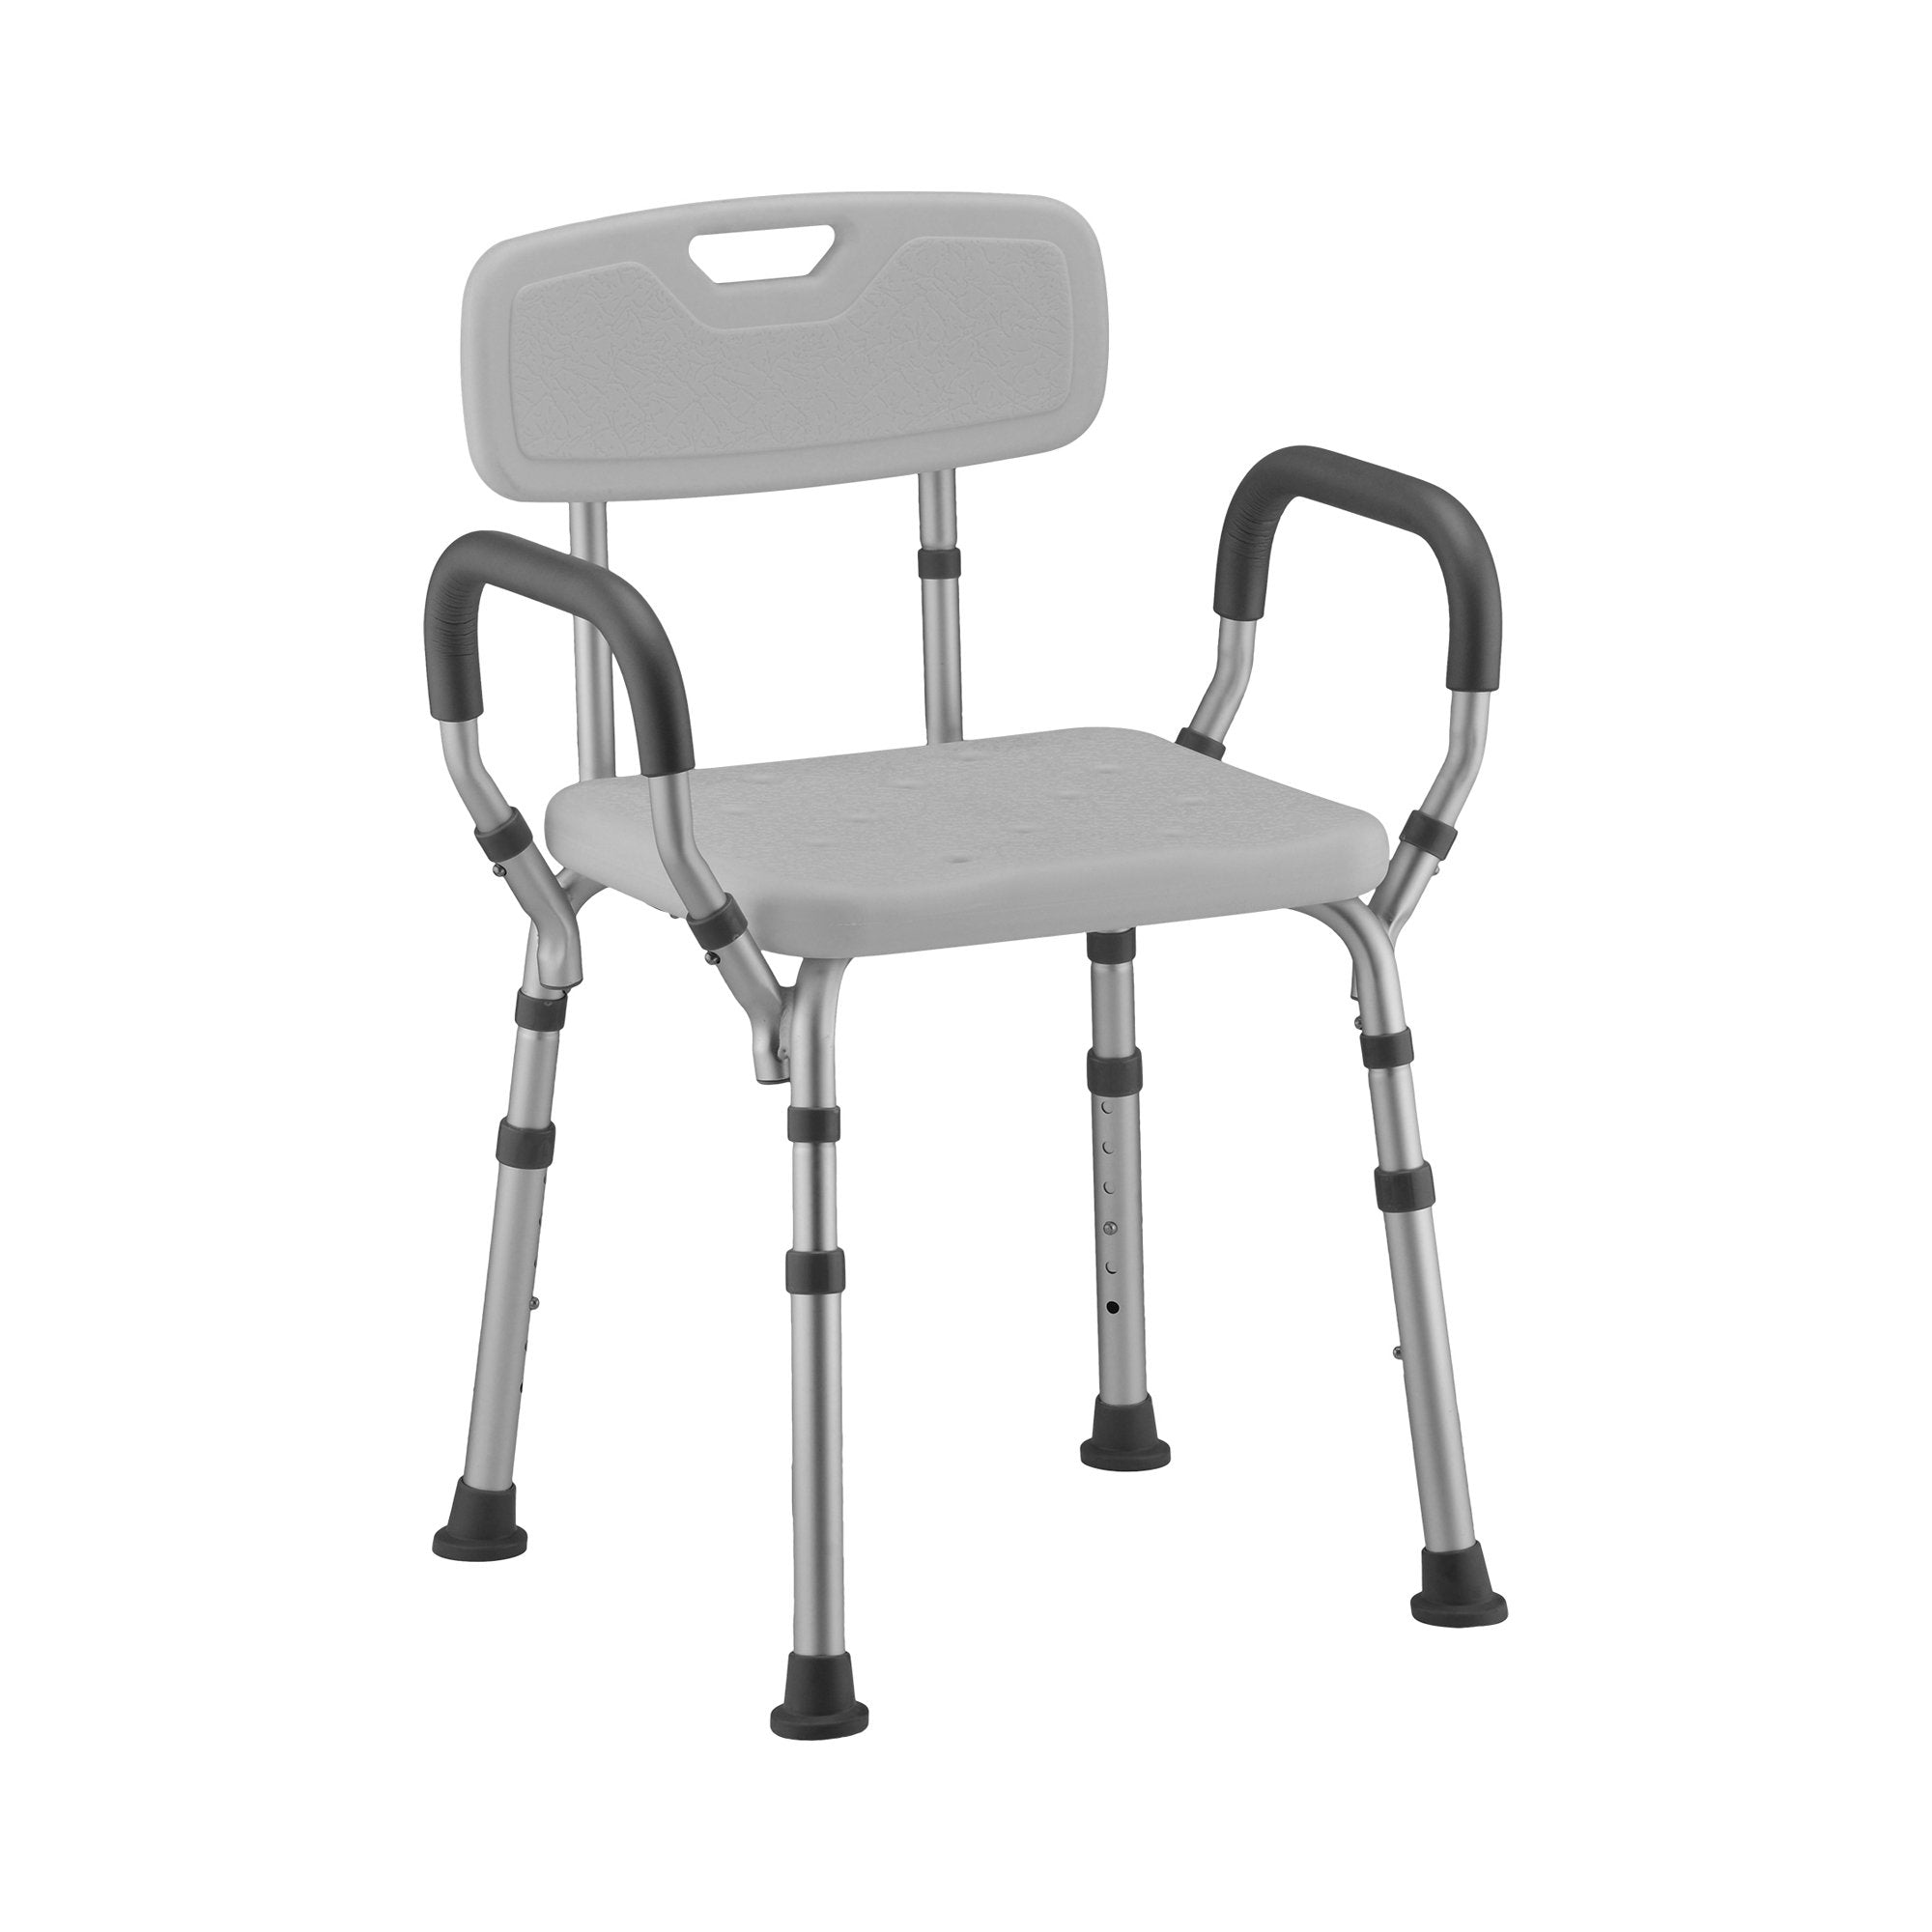 Shower Chair Nova Padded Fixed Arms Aluminum Frame Removable Backrest 15-3/4 Inch Seat Width 300 lbs. Weight Capacity